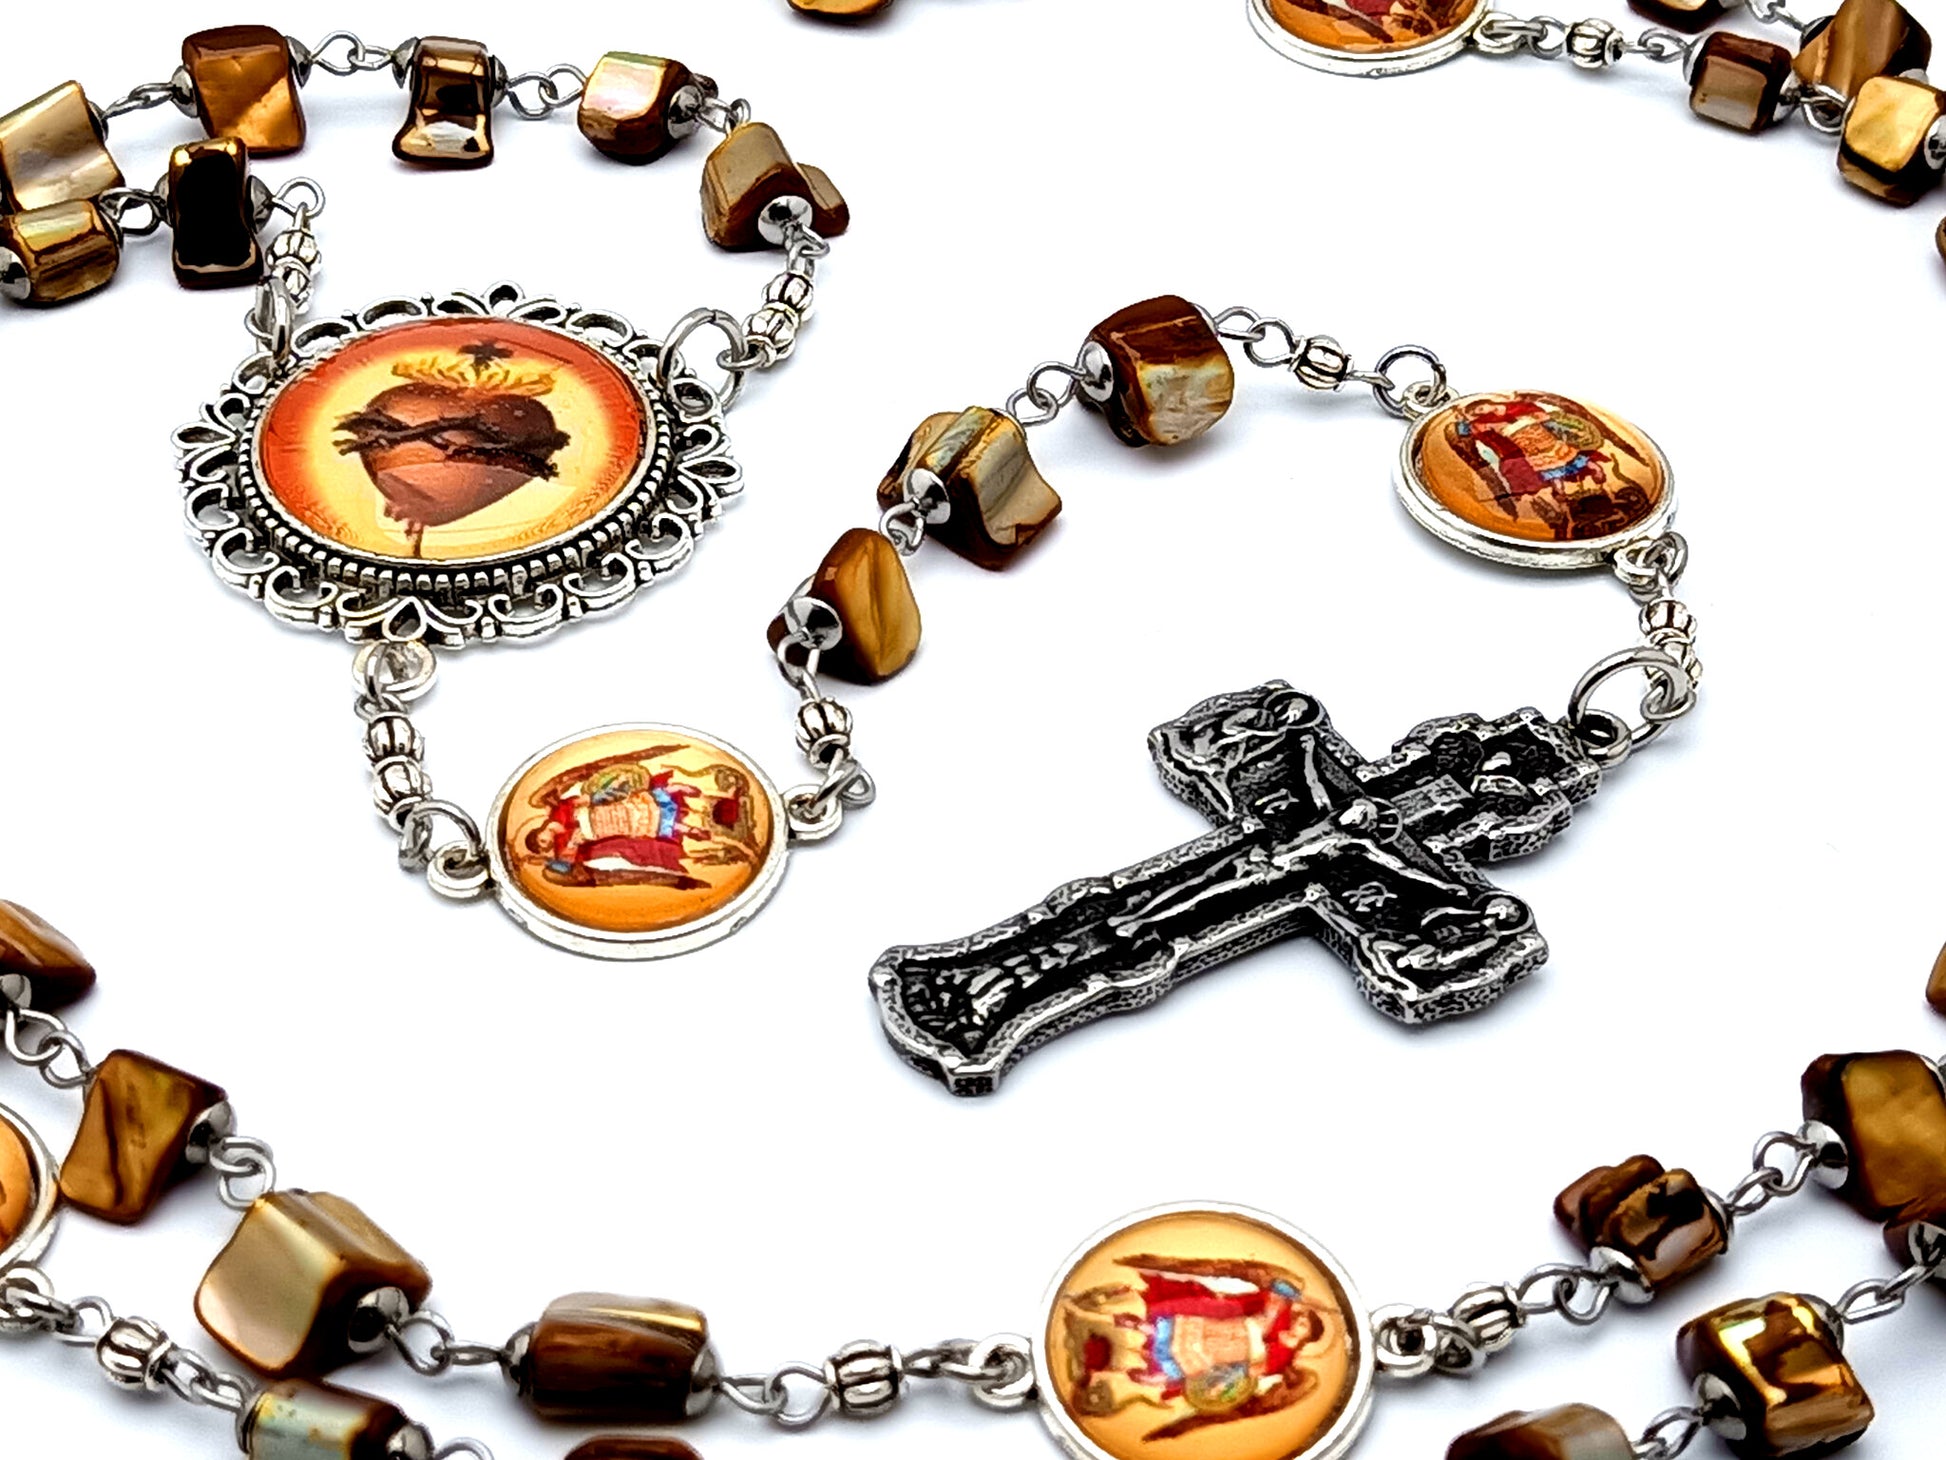 Stainless steel hematite gemstone rosary beads with Saint Benedict cen –  Unique Rosary Beads